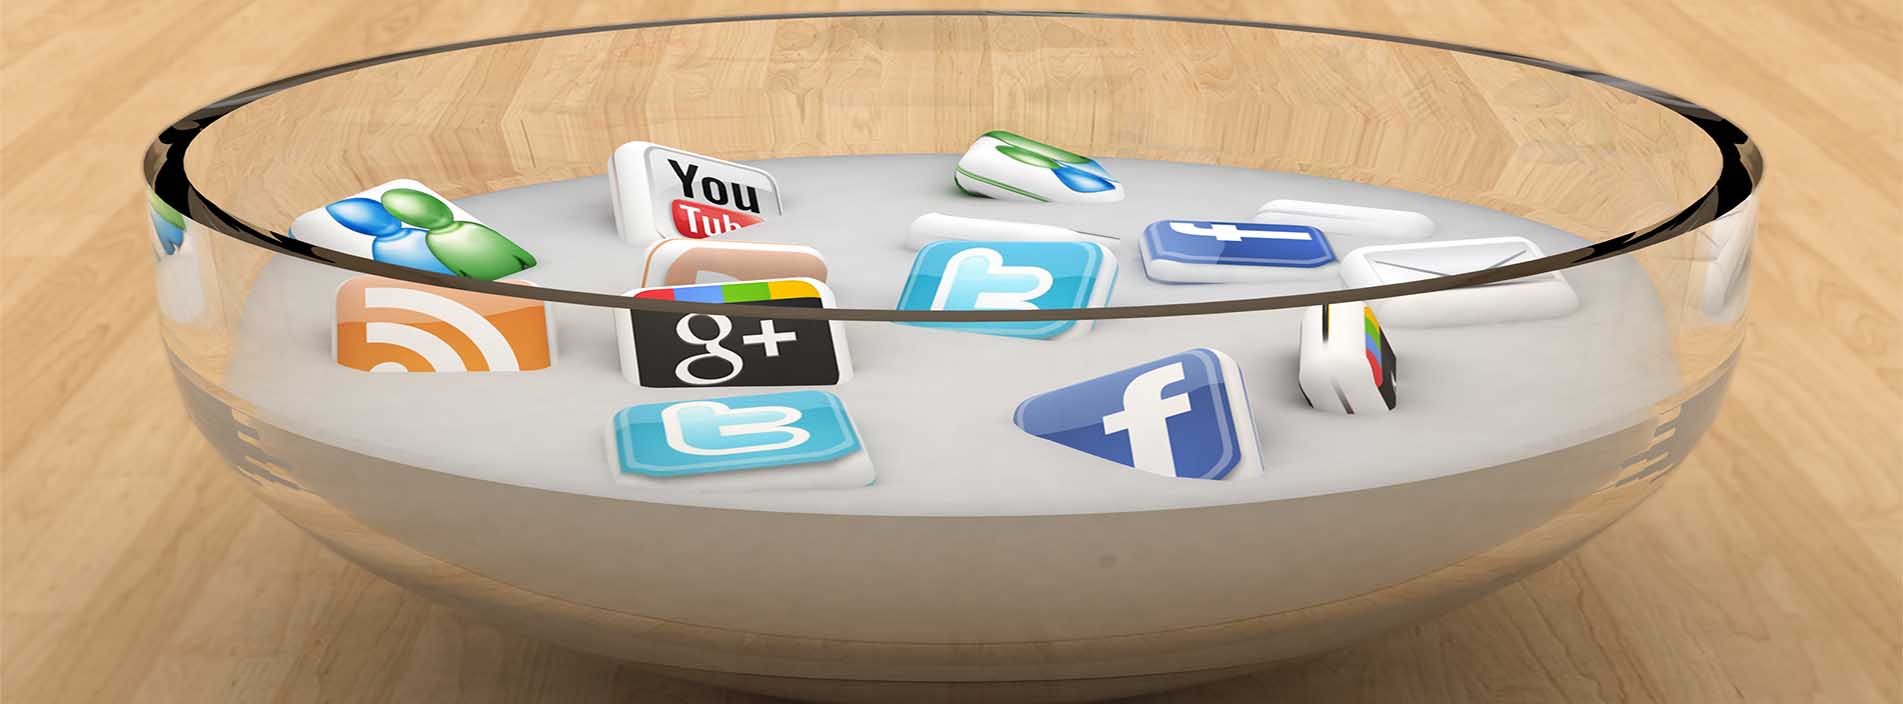 social-media-soup-on-wooden-surface2